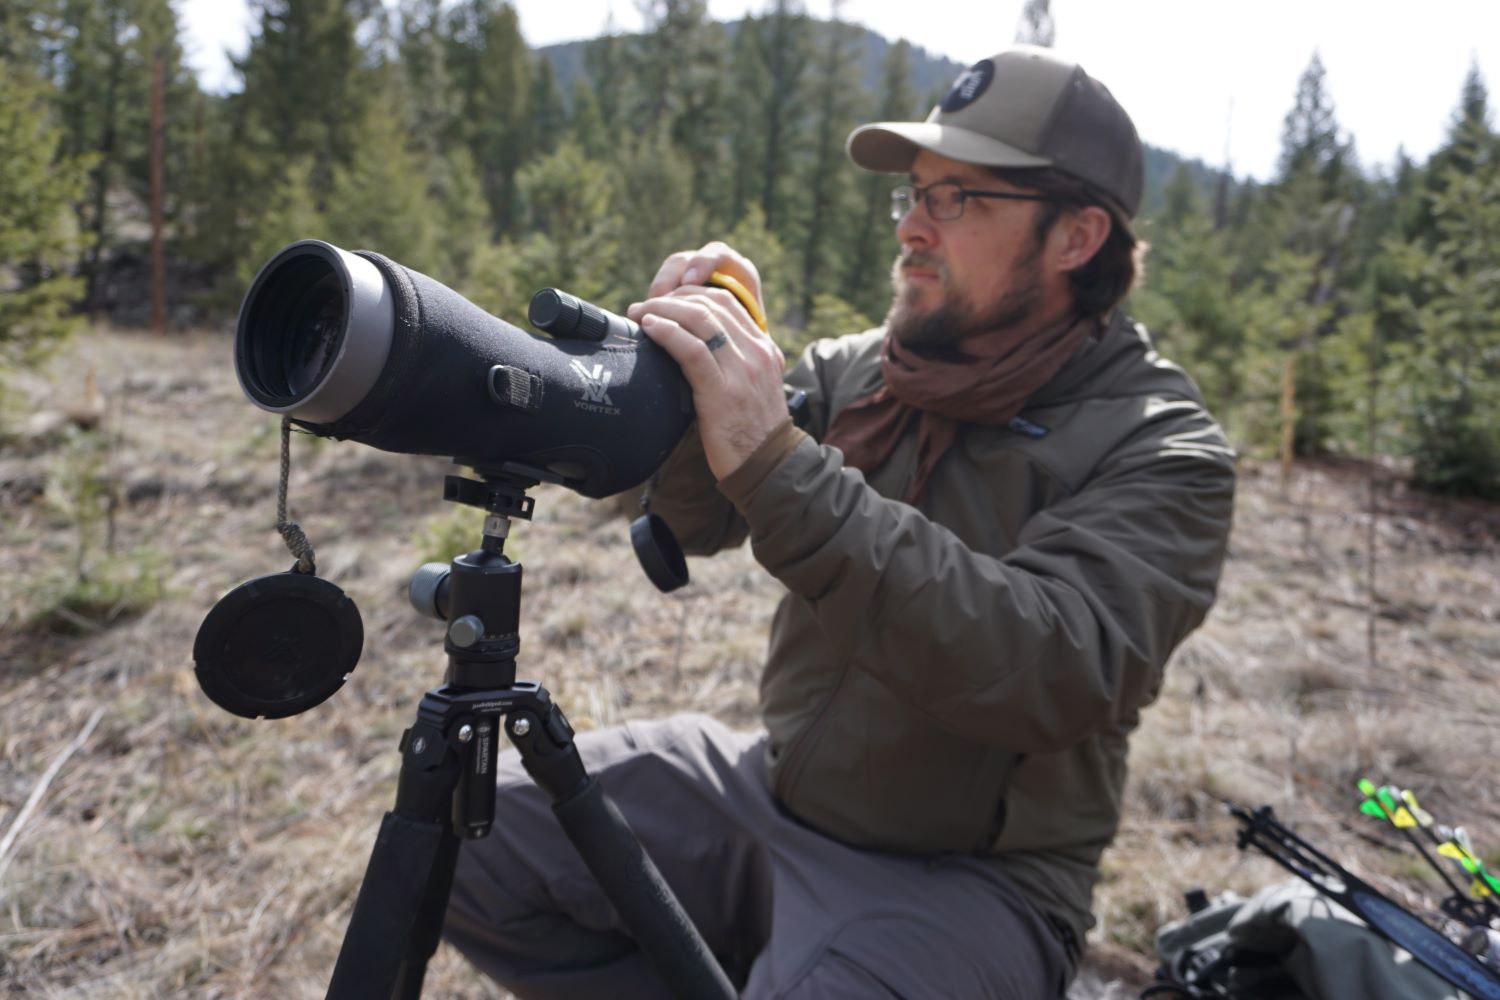 Jordan Voigt uses Ascent tripod for digiscoping 